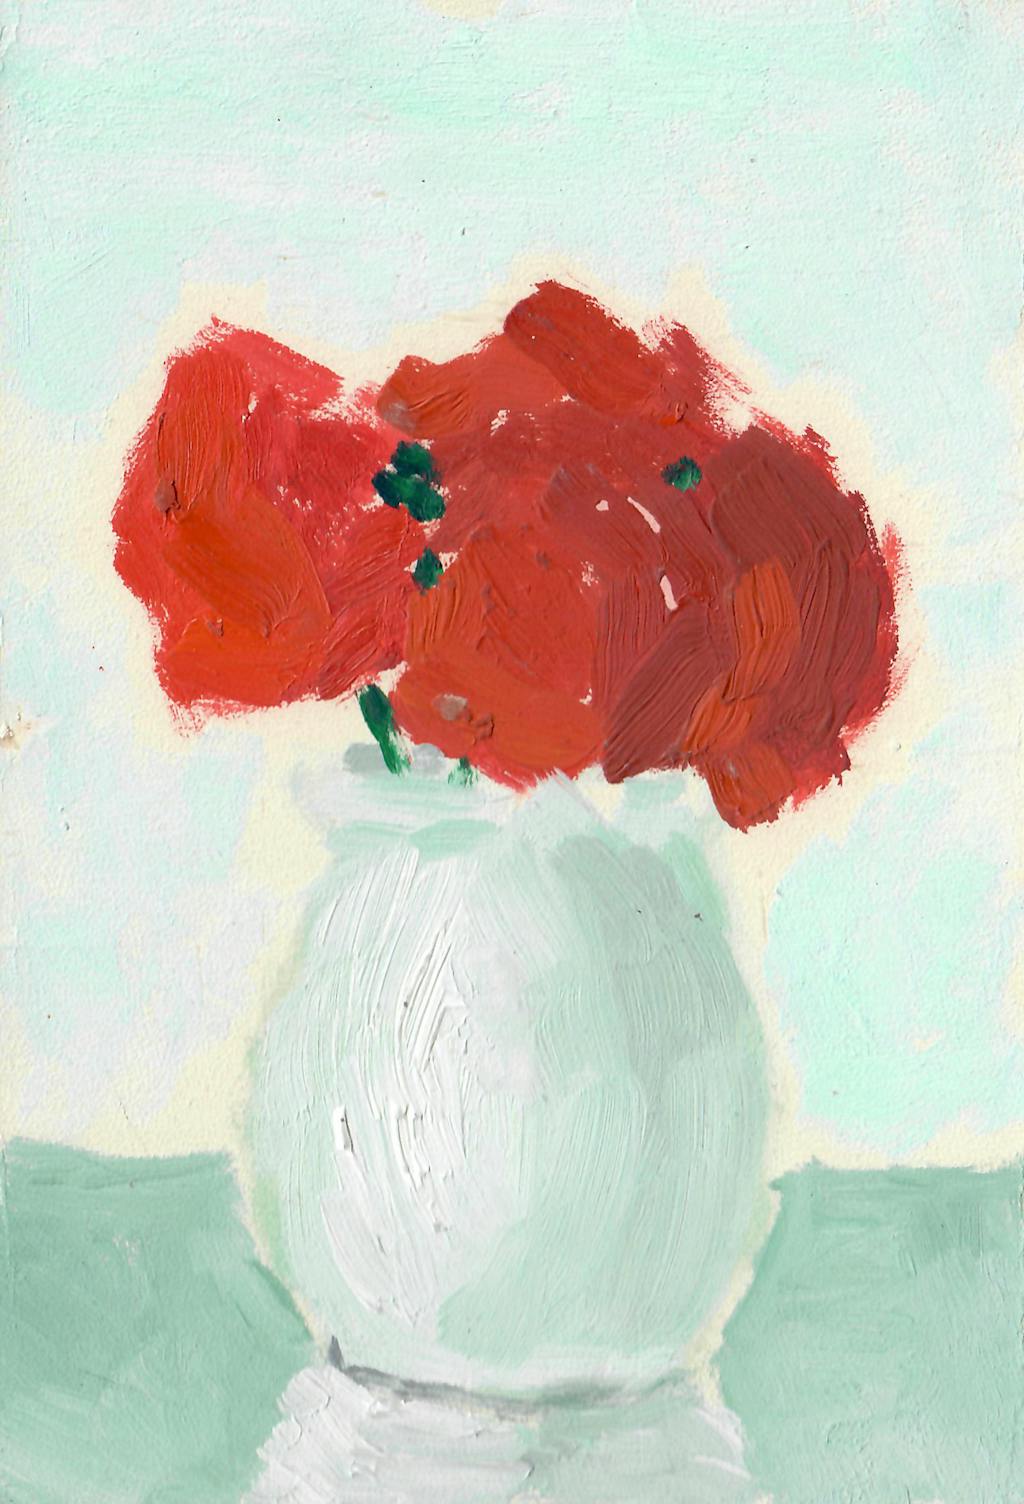 Red Flowers  LI Shan, 1974. Oil on paper, 19.5 × 13.5 cm - © Courtesy of LI Shan and Don Gallery, Paris Internationale